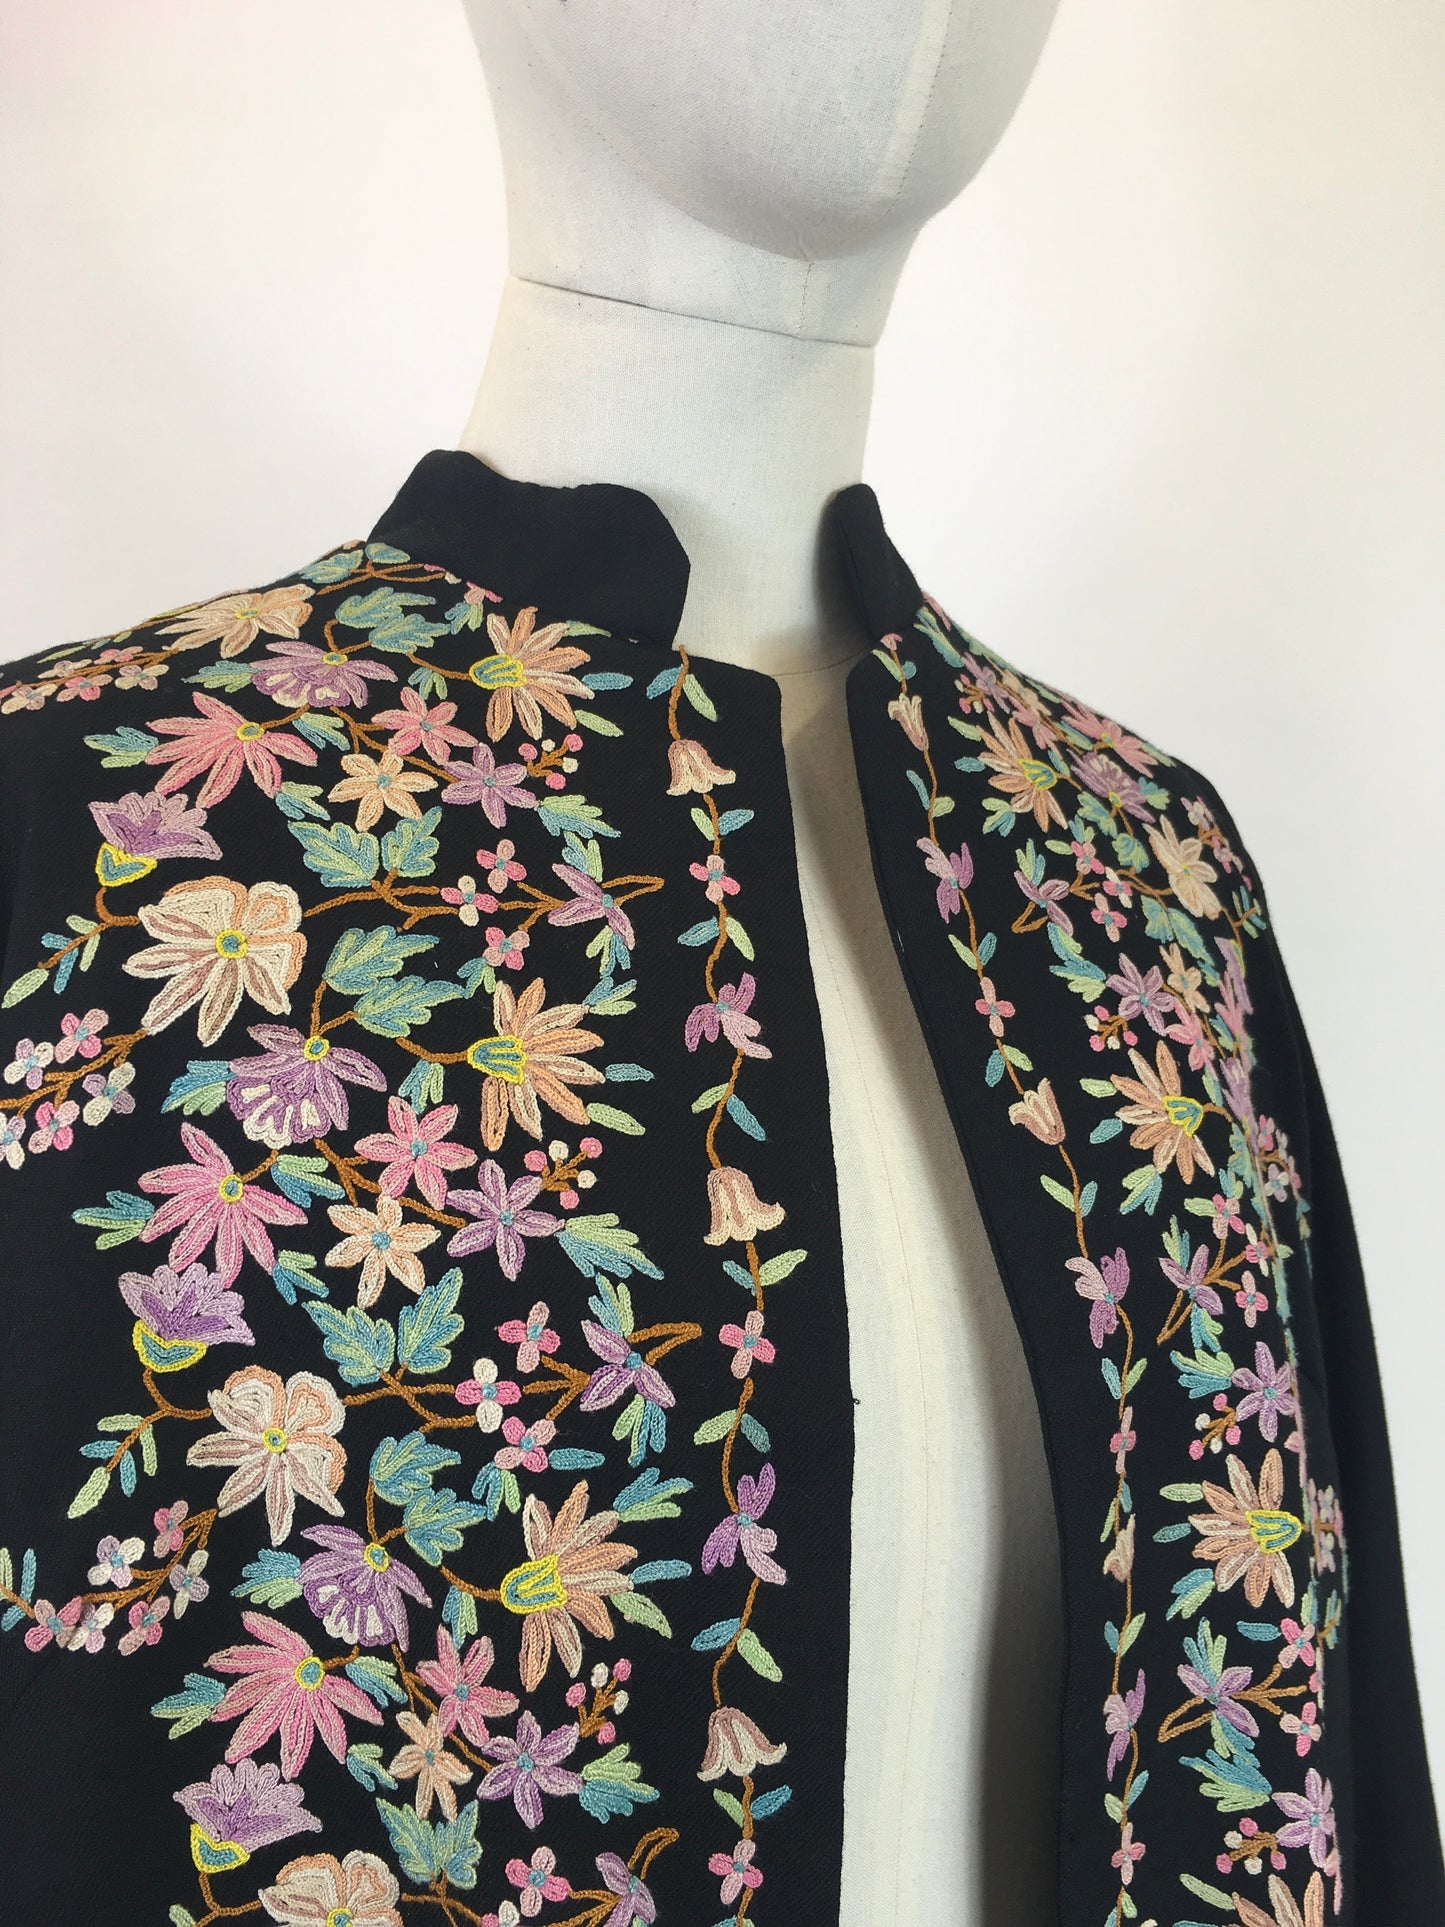 Original Late 1930's Early 1940's Edge to Edge Jacket - With Exquisite Embroidery Detailing in Pastels